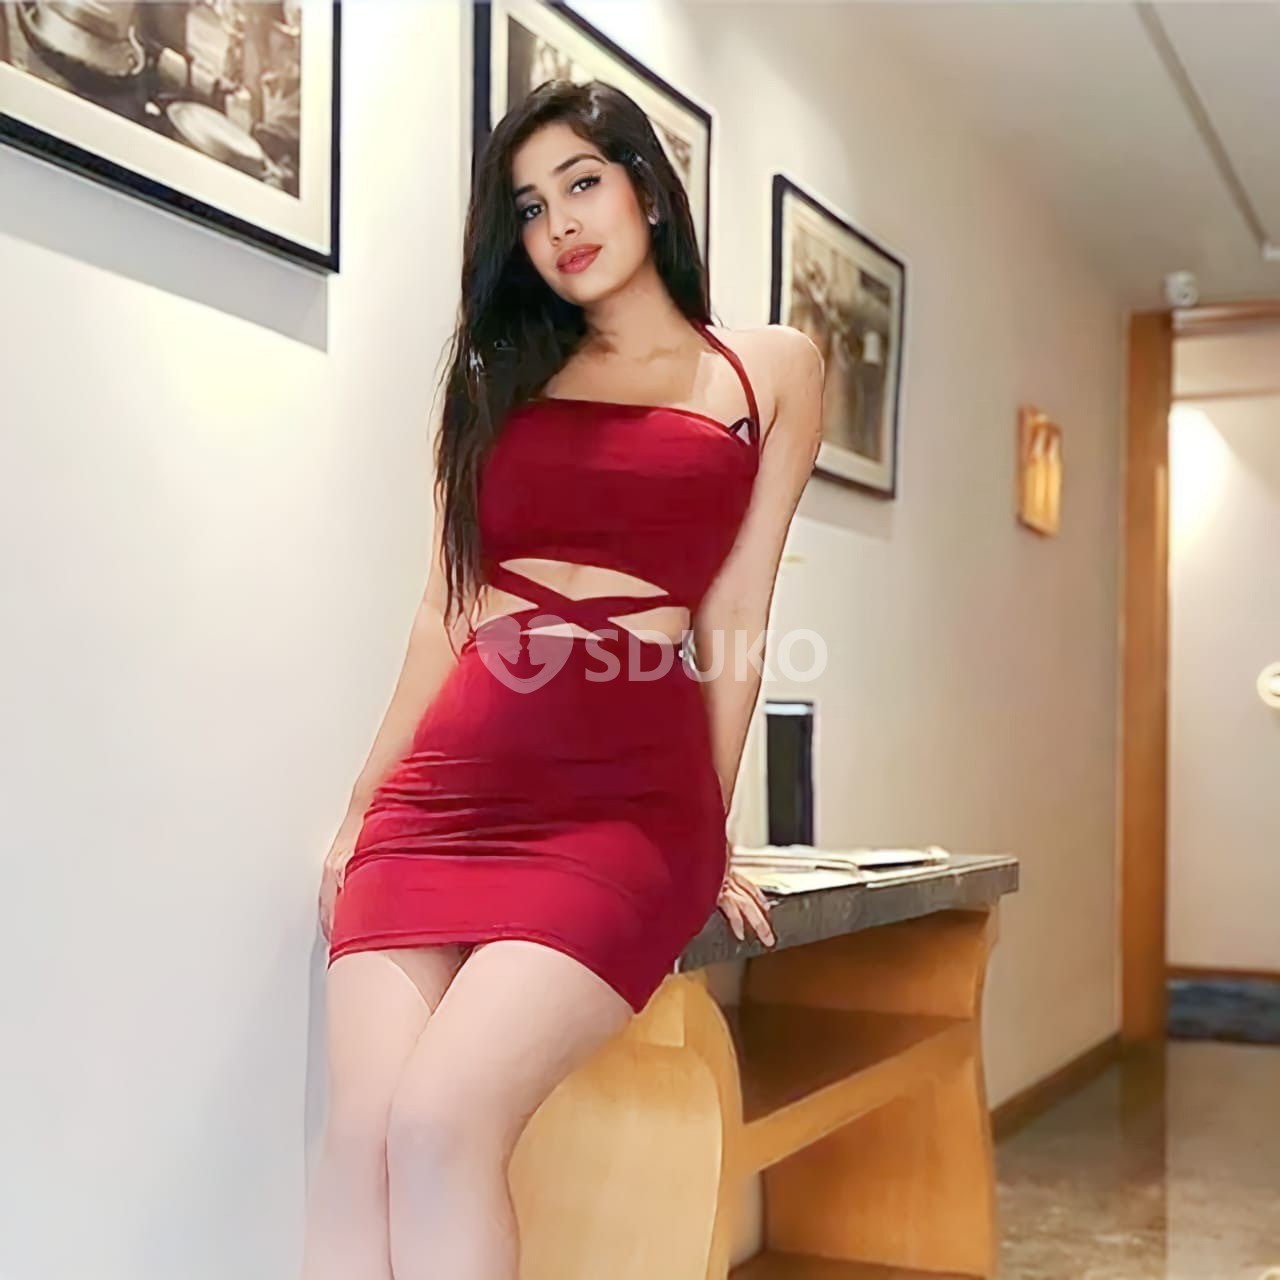 Dilshad garden 🆑 BEST CALL GIRL INDEPENDENT ESCORT SERVICE IN LOW BUDGET...